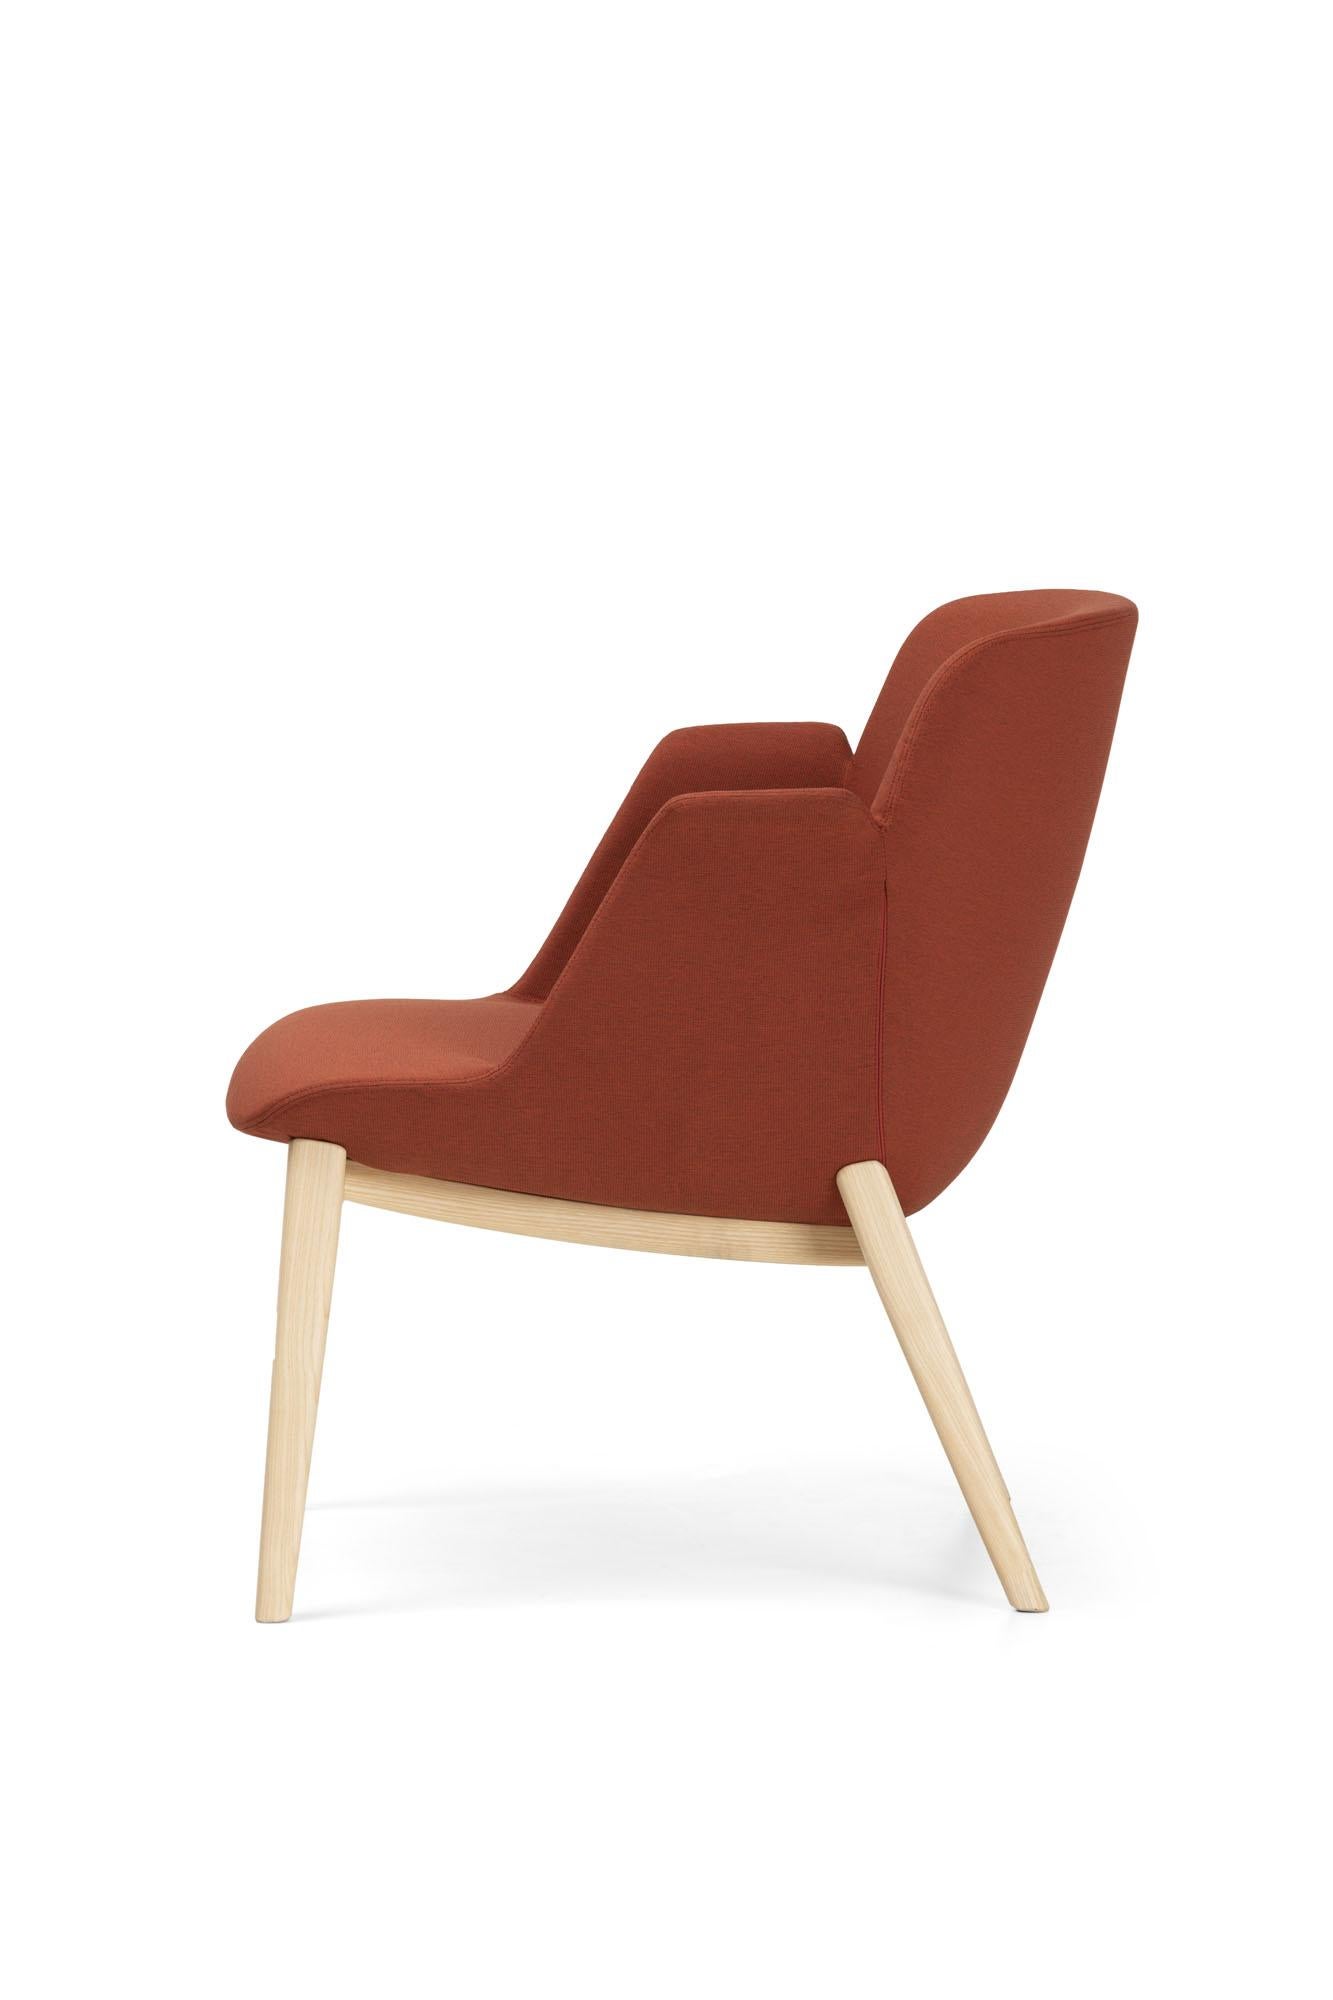 Italian 21st Century Modern Wooden Red Armchair Hive Made in Italy For Sale